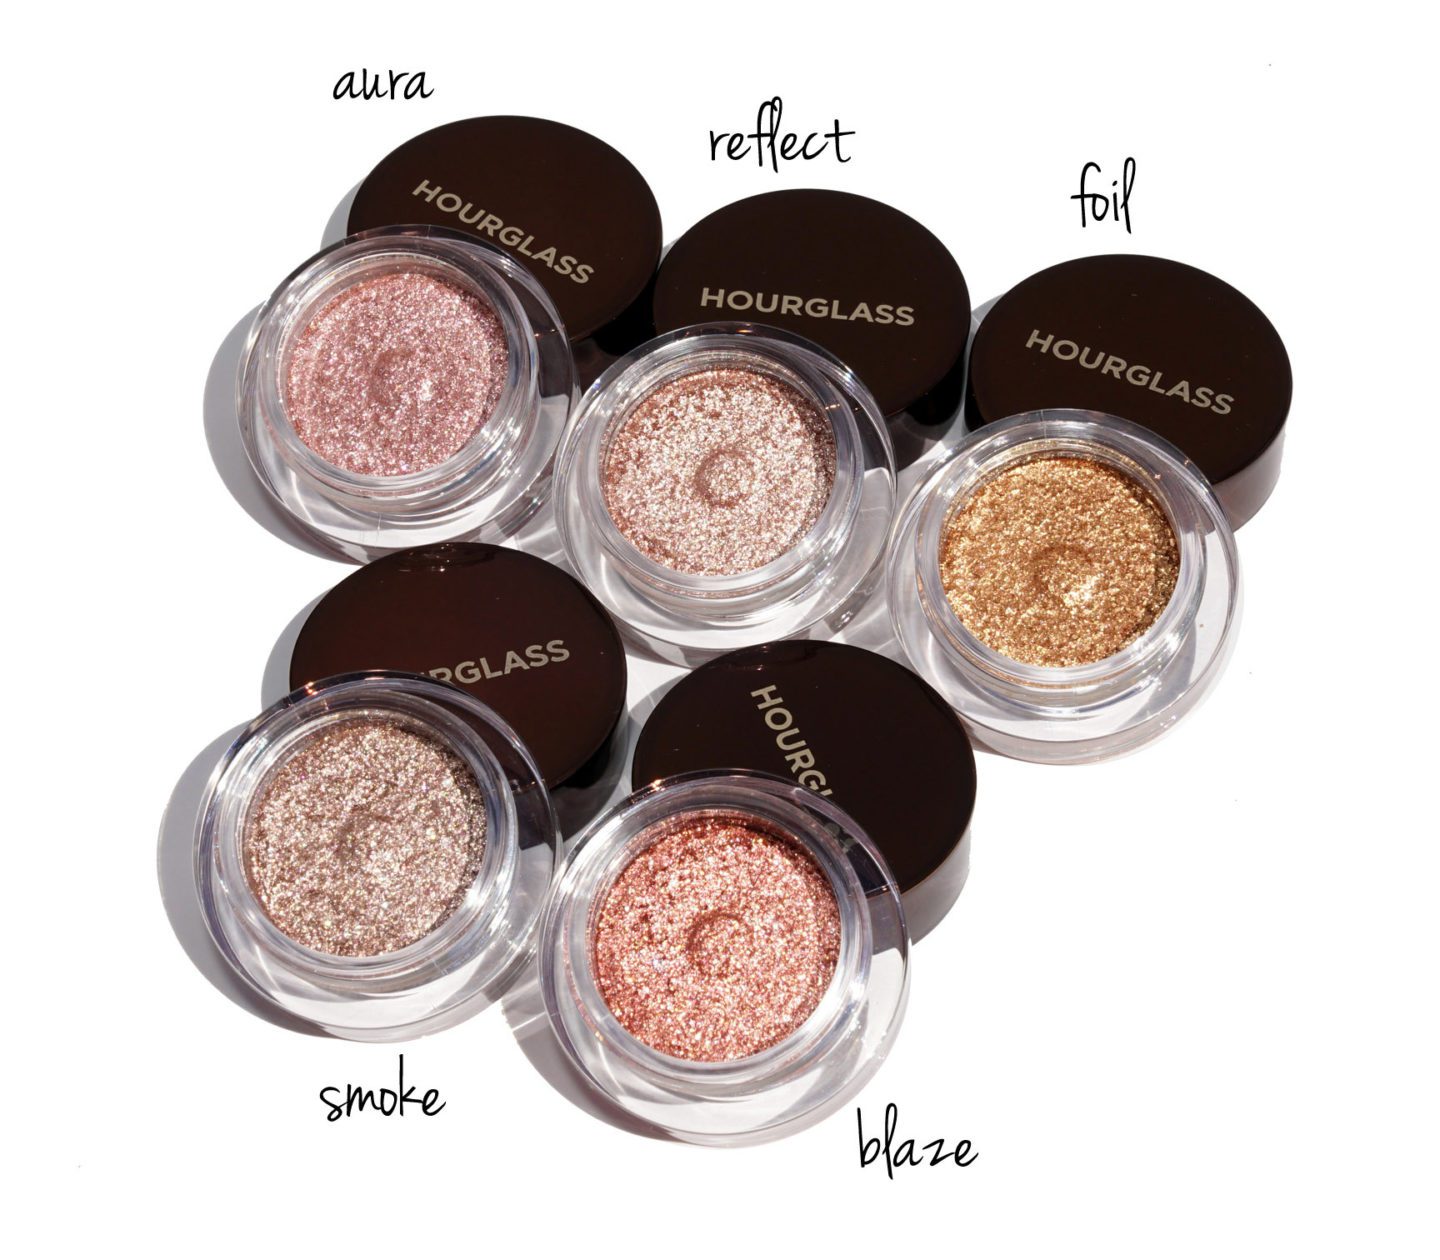 Hourglass Scattered Light Aura, Reflect, Foil, Smoke and Blaze | The Beauty Look Book